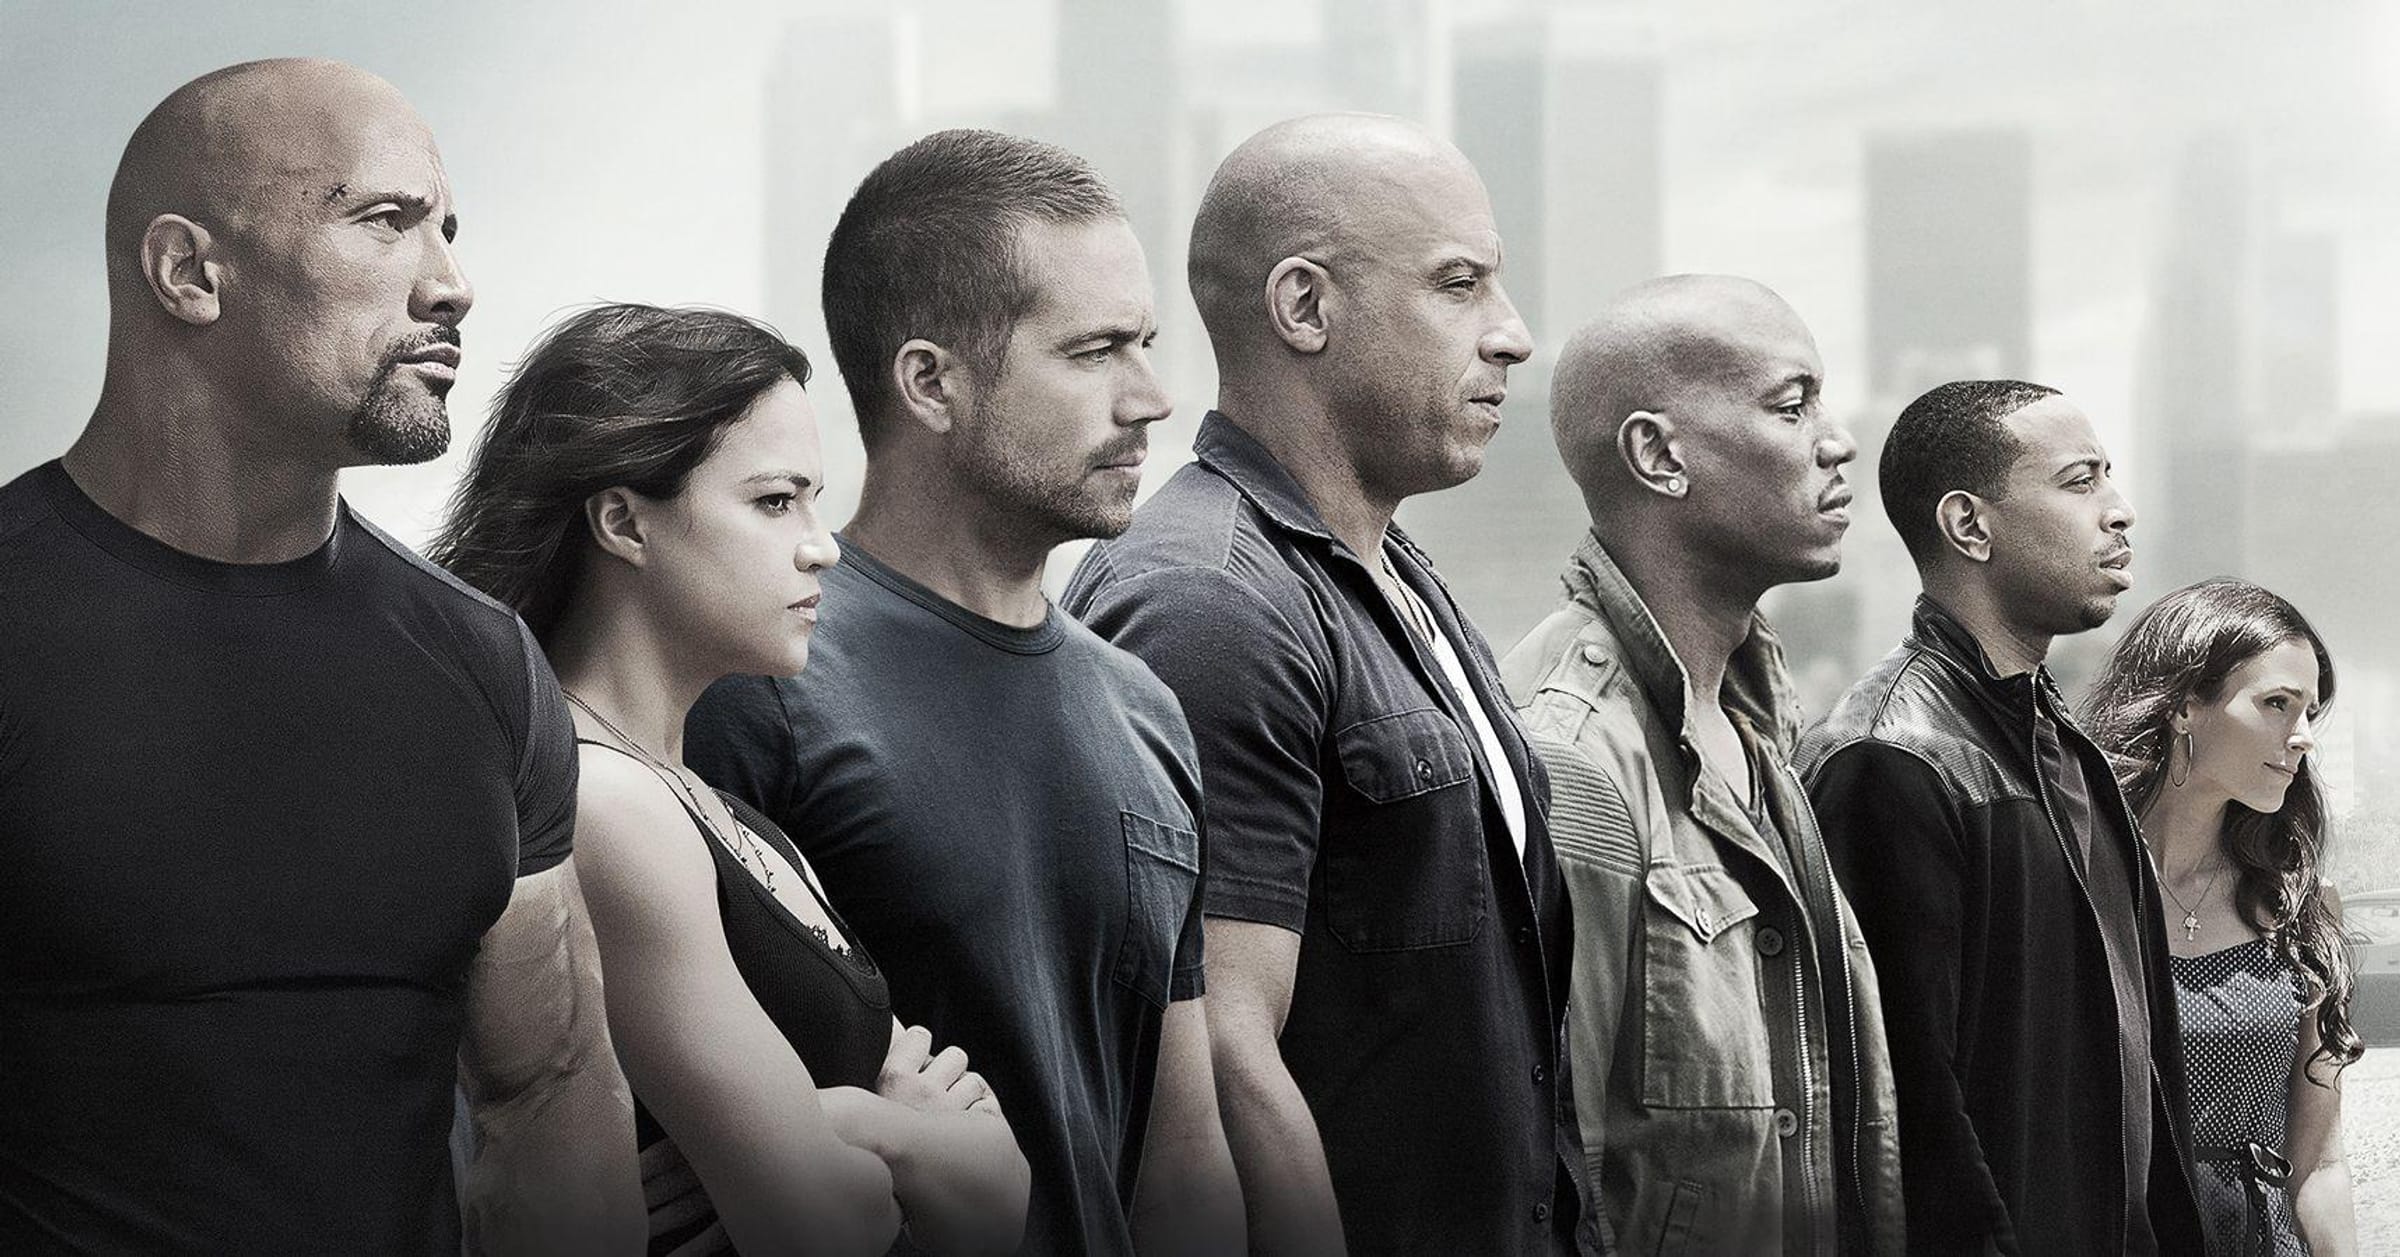 The remarkable evolution of the Fast and Furious movie franchise